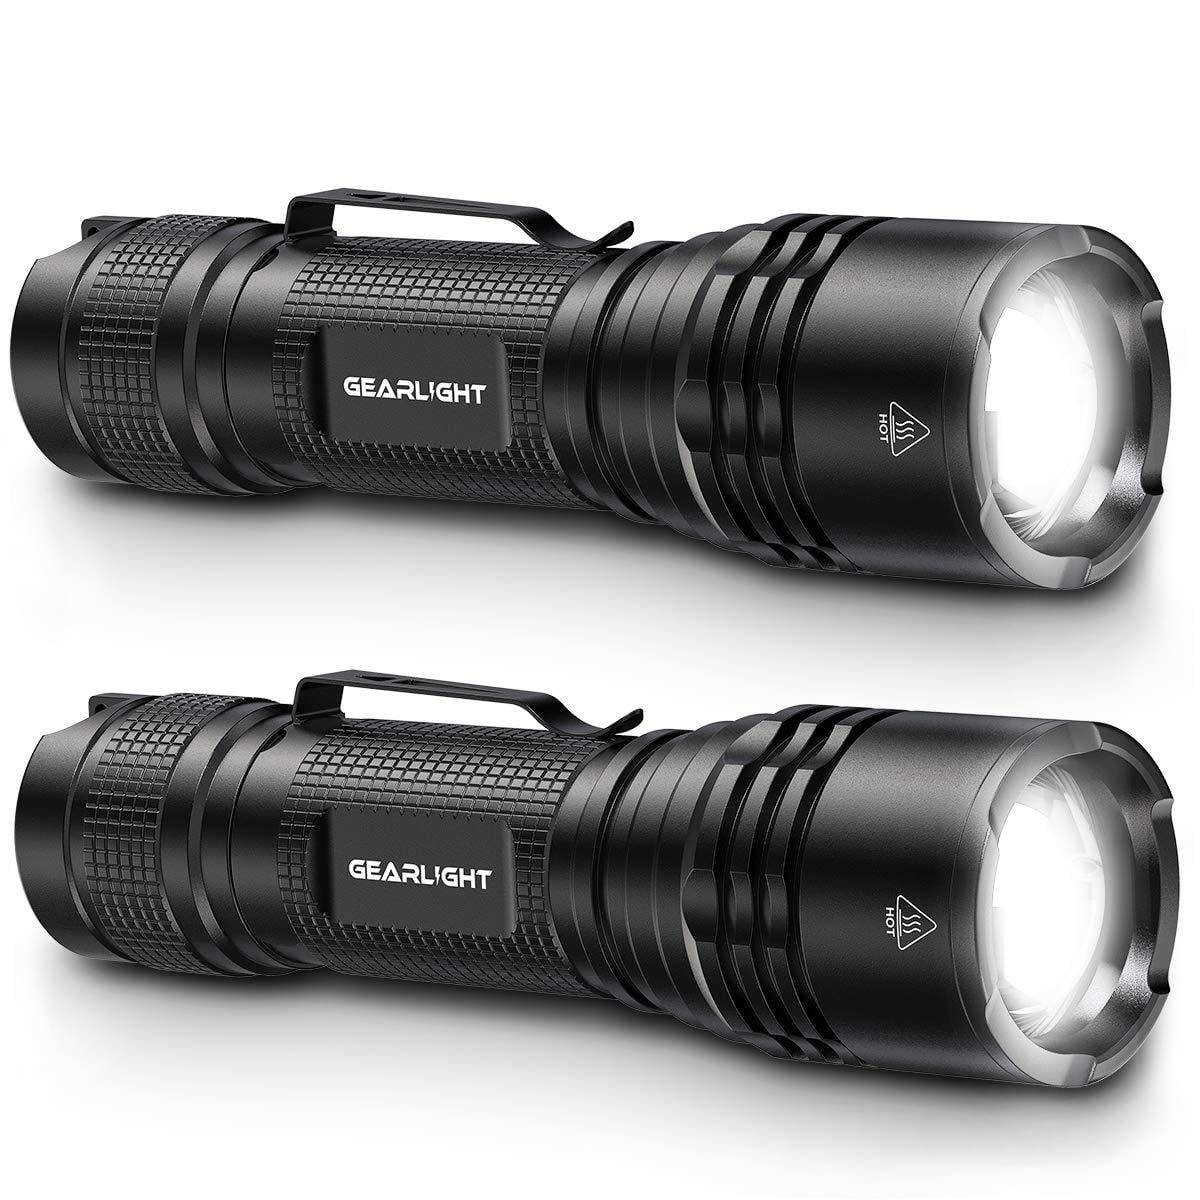 GearLight TAC Tactical Flashlight PACK] - Single Mode, High Lumen, Zoomable, Water Resistant, Flash Light - Camping, Outdoor, Emergency, Everyday Flashlights with Clip - Walmart.com